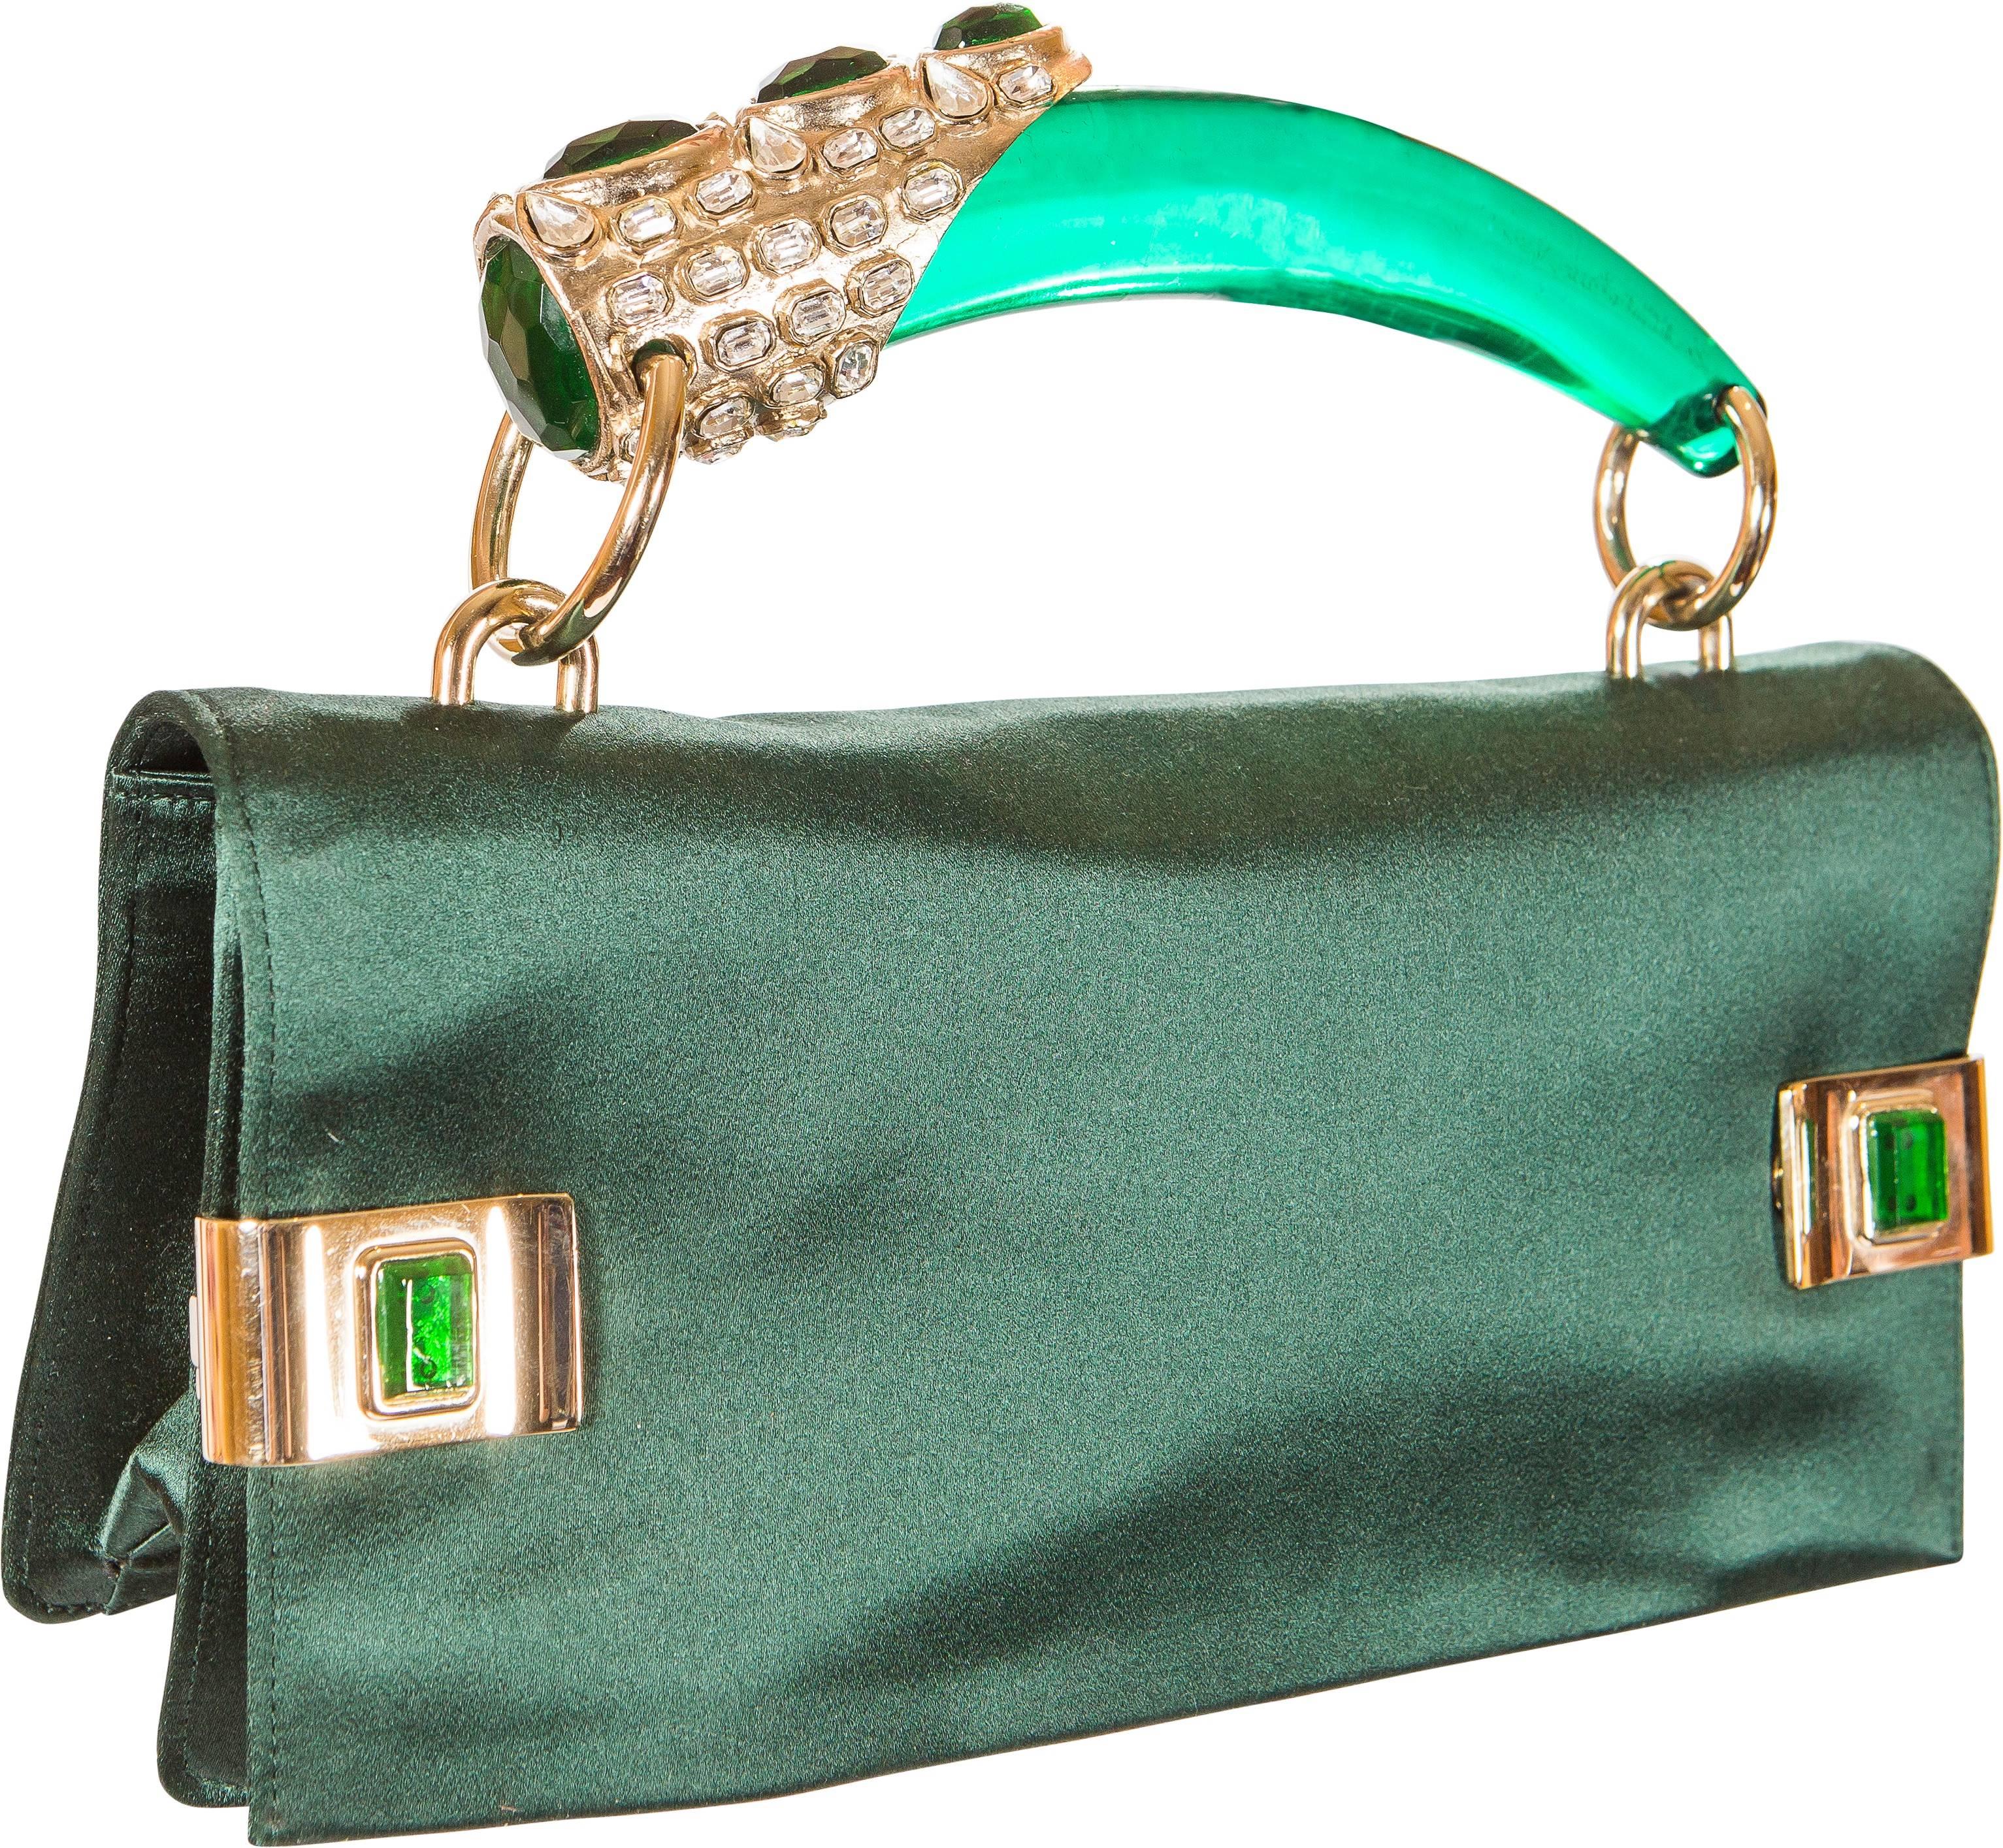 Exceptional and very rare Tom Ford For Yves Saint Laurent silk satin jewelled evening bag, with green lucite handle, from 2003.

Please contact our stylists for additional information.